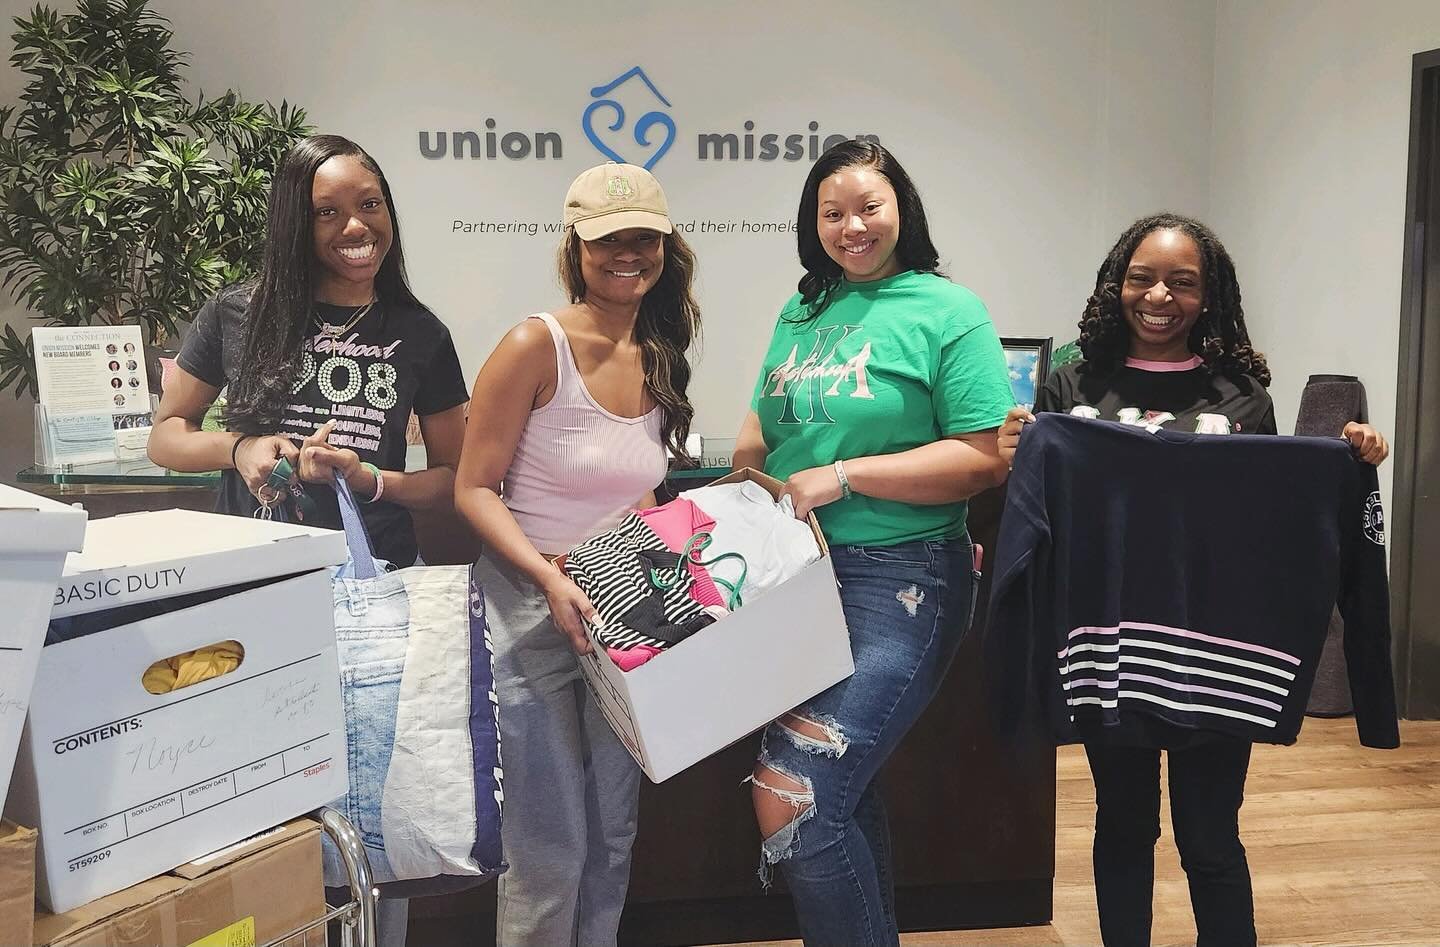 Spreading love through service 💖 The AKAs from SSU organized a clothing drive to support the Clothing Closet and give back to our community. Thank you! 🩵